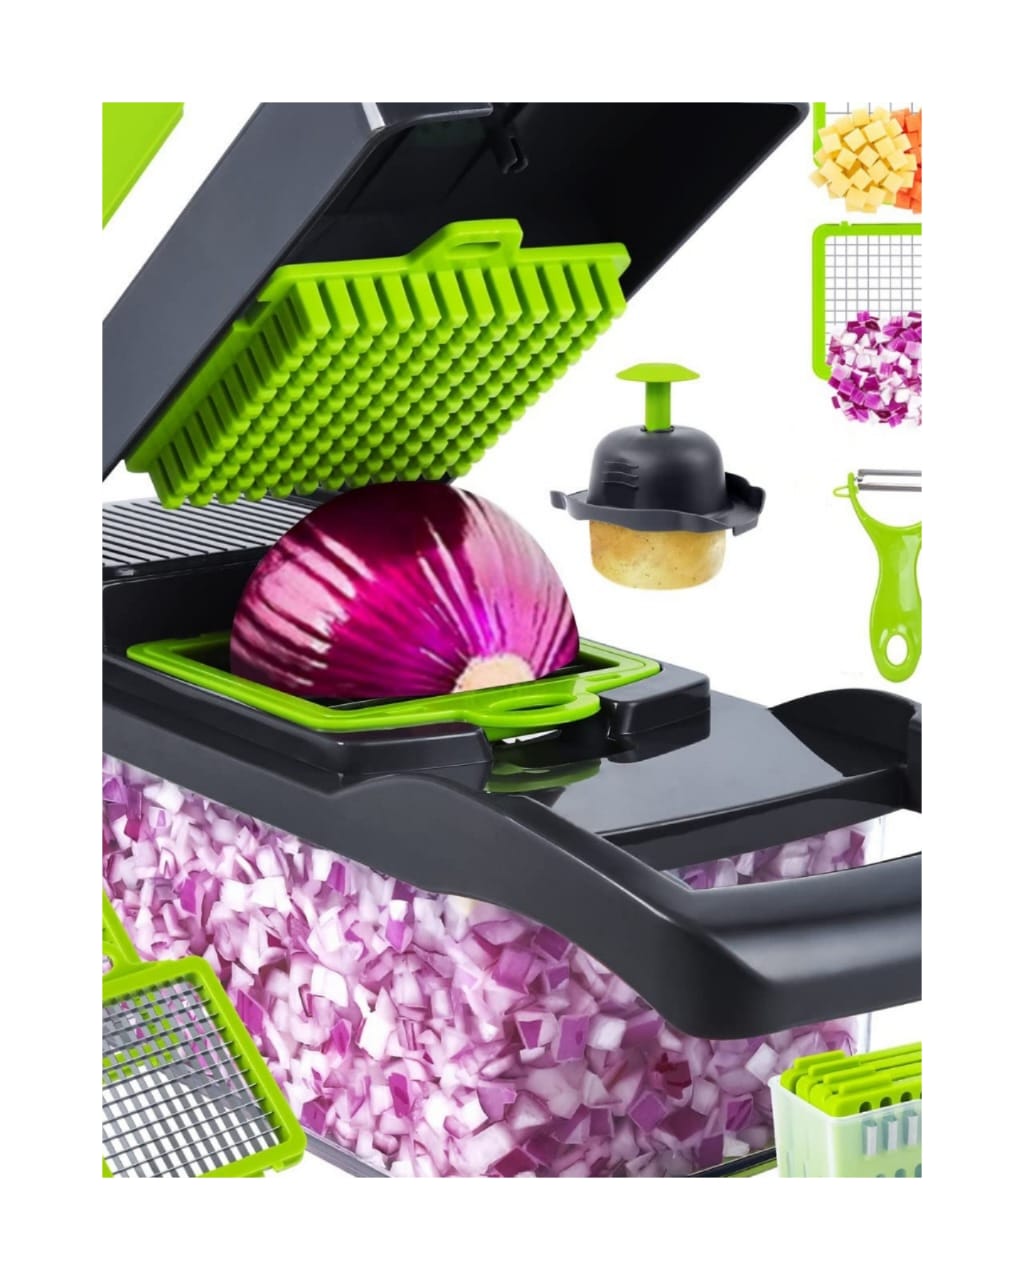 14 In 1 Vegetable Chopper and Cutter (Premium Quality)